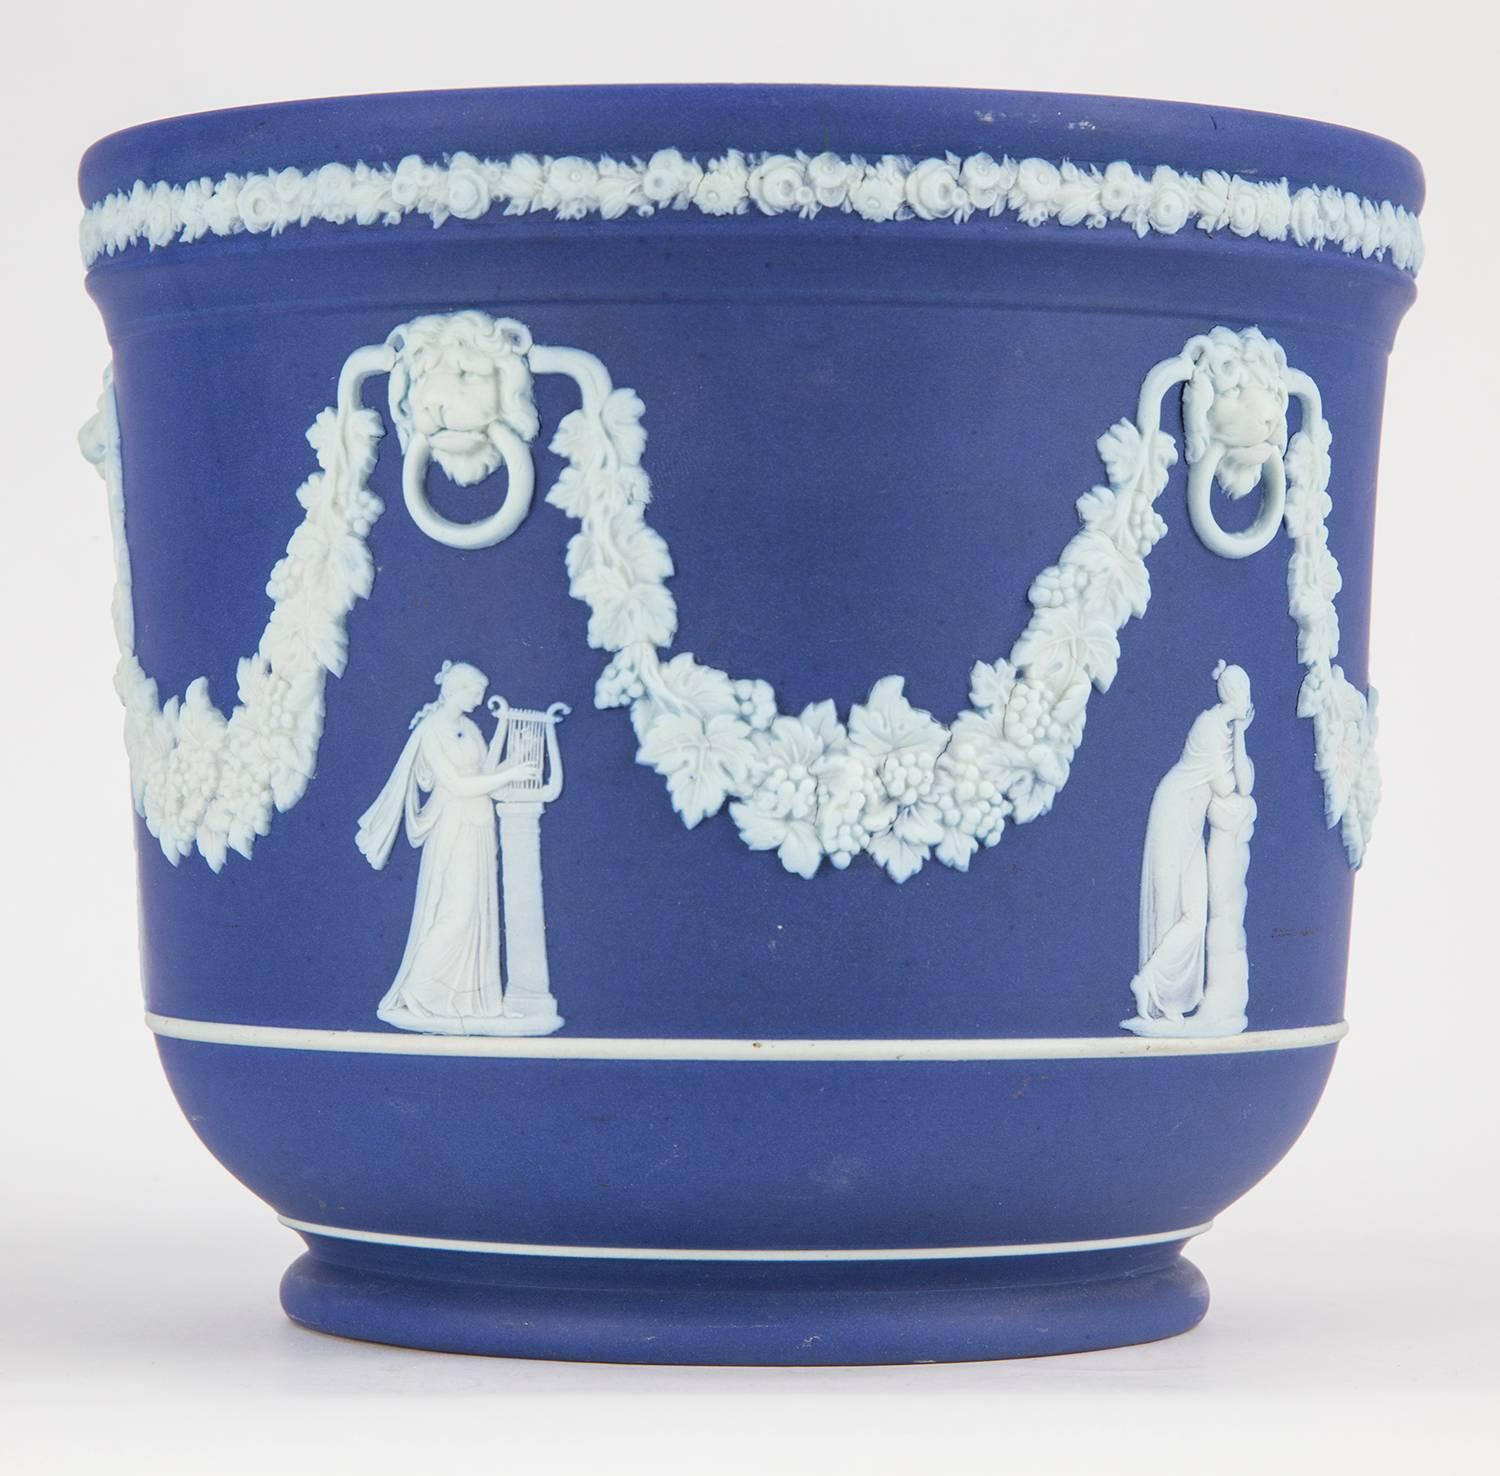 Estate Wedgwood Blue Jasper Heirloom Quality Cache Pot, decorated with applied figures to five sides; above each figure is an applied white lion with a vine leaf swag from behind his head with large leaves and bunches of grapes. Below the raised